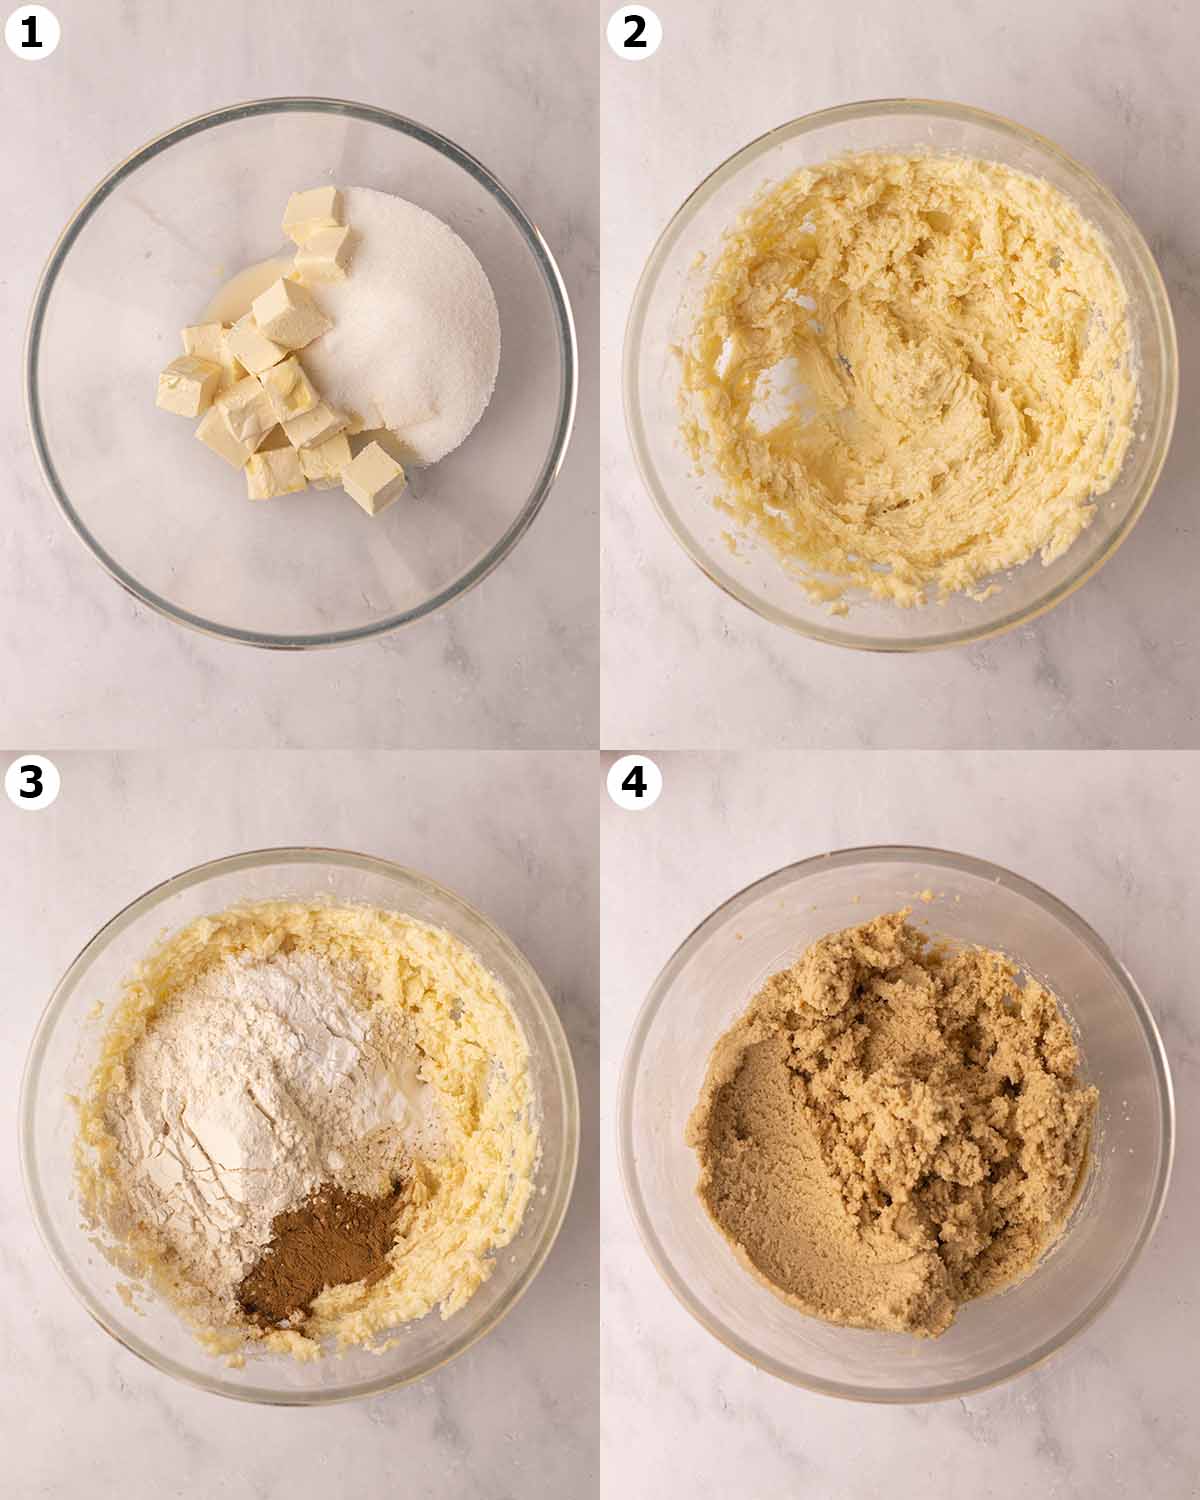 Four image collage showing steps for making the cookie dough in one large bowl.